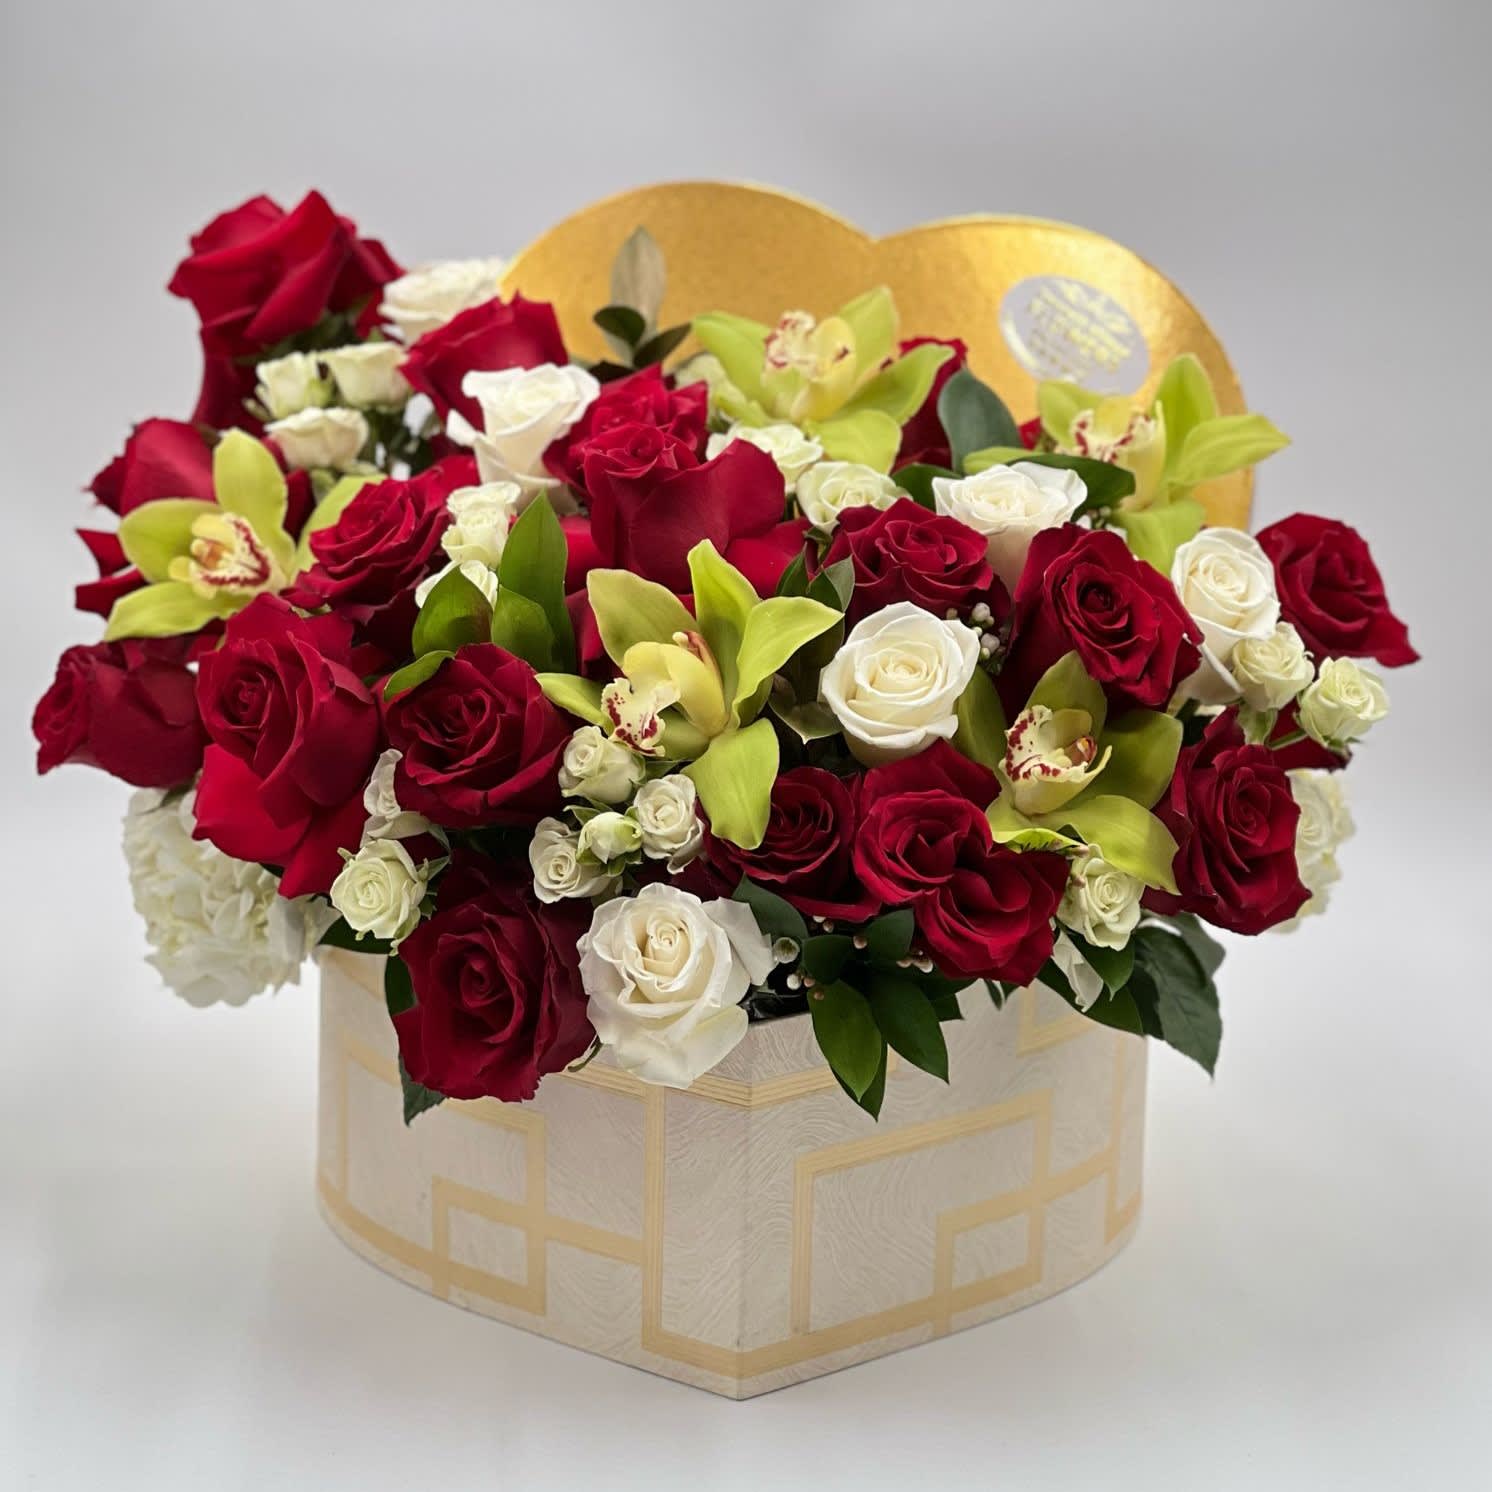 Love Box - This luxurious floral arrangement nestled in an elegant, cream-colored octagonal box with geometric patterns. The arrangement highlights blend of red and white roses, interspersed with delicate greenery and exotic green orchids, adding a touch of sophisticated variety. The backdrop is a golden heart, which complements the rich colors of the flowers, suggesting that this could be a premium gift for a Valentine's Day or an anniversary.